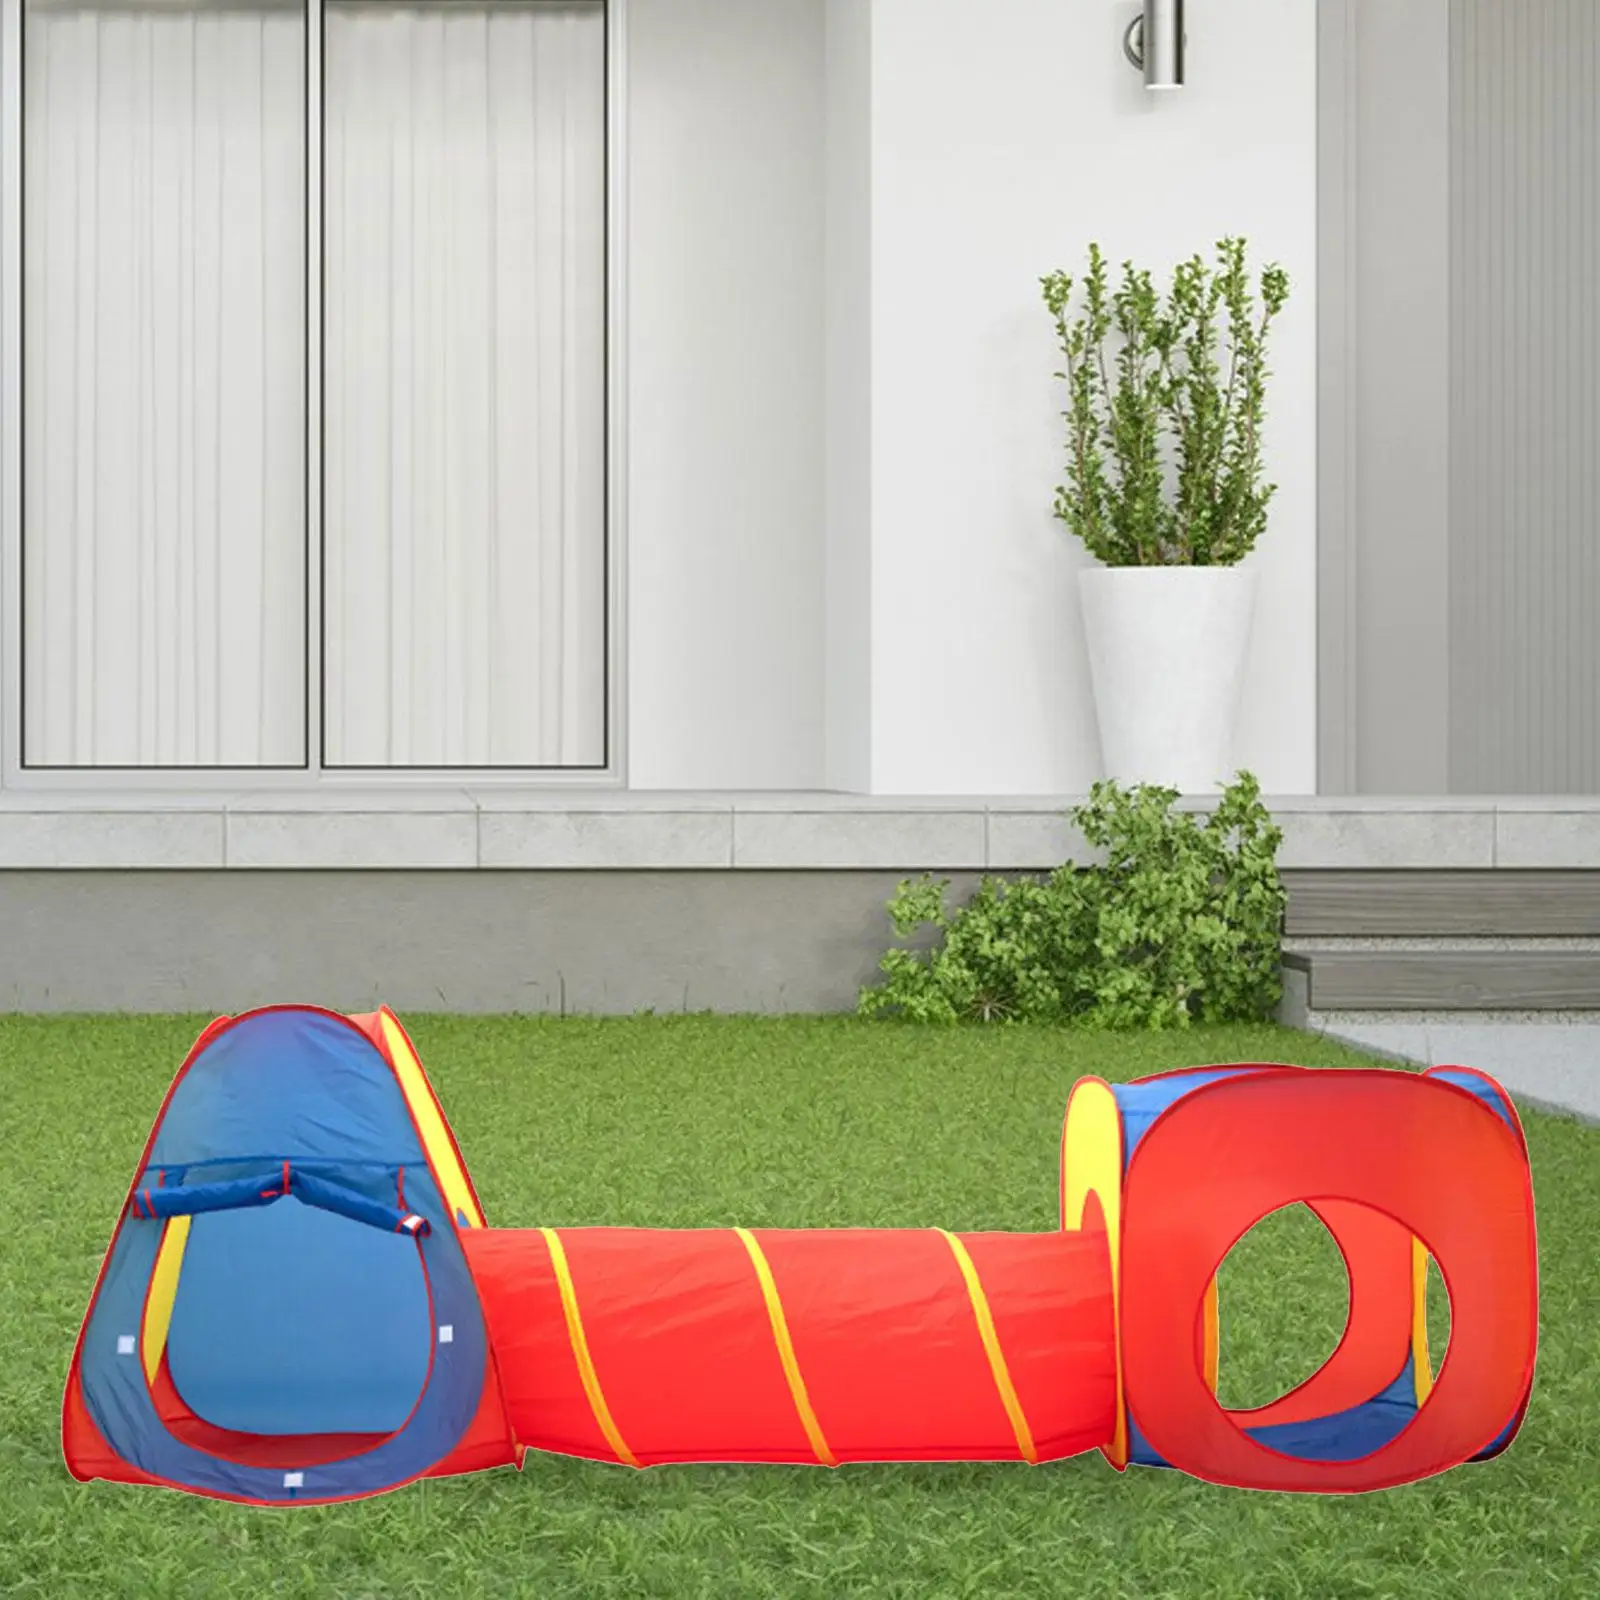 Kids Play Tents with Tunnels Gym Activity Also for Pets Large Foldable 3 in 1 Playhouse for Playground, Toddlers, Boys Girls